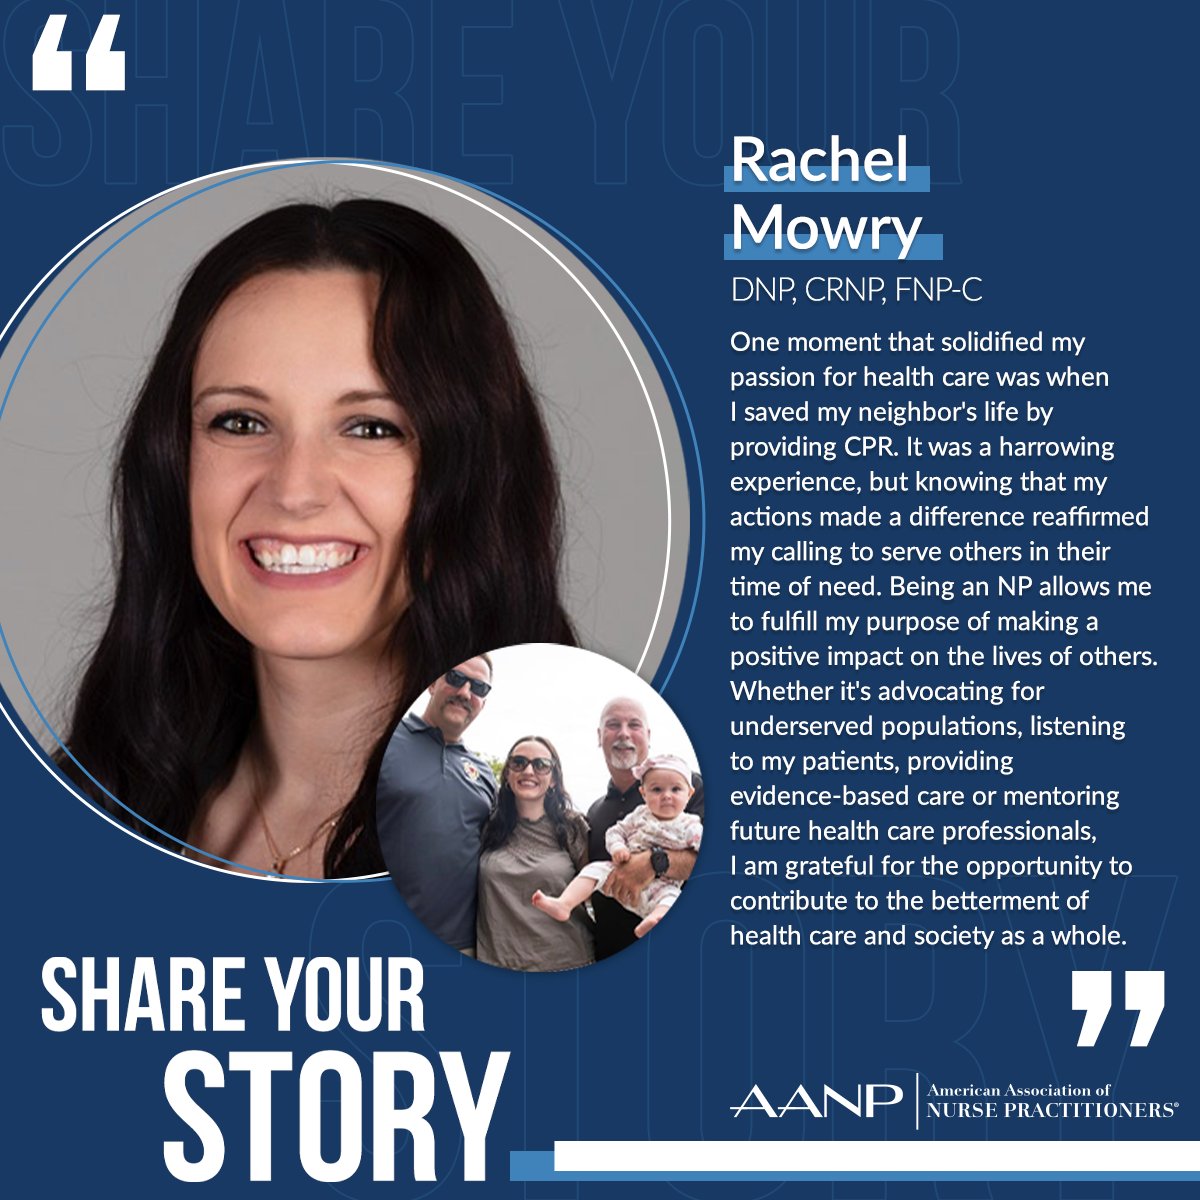 Thank you, Dr. Rachel Mowry, for sharing your inspiring testimony! NPs — share your story with AANP! Submit your photos and written testimony here: aanp.org/shareyourstory. #NPsLead #ShareYourStory